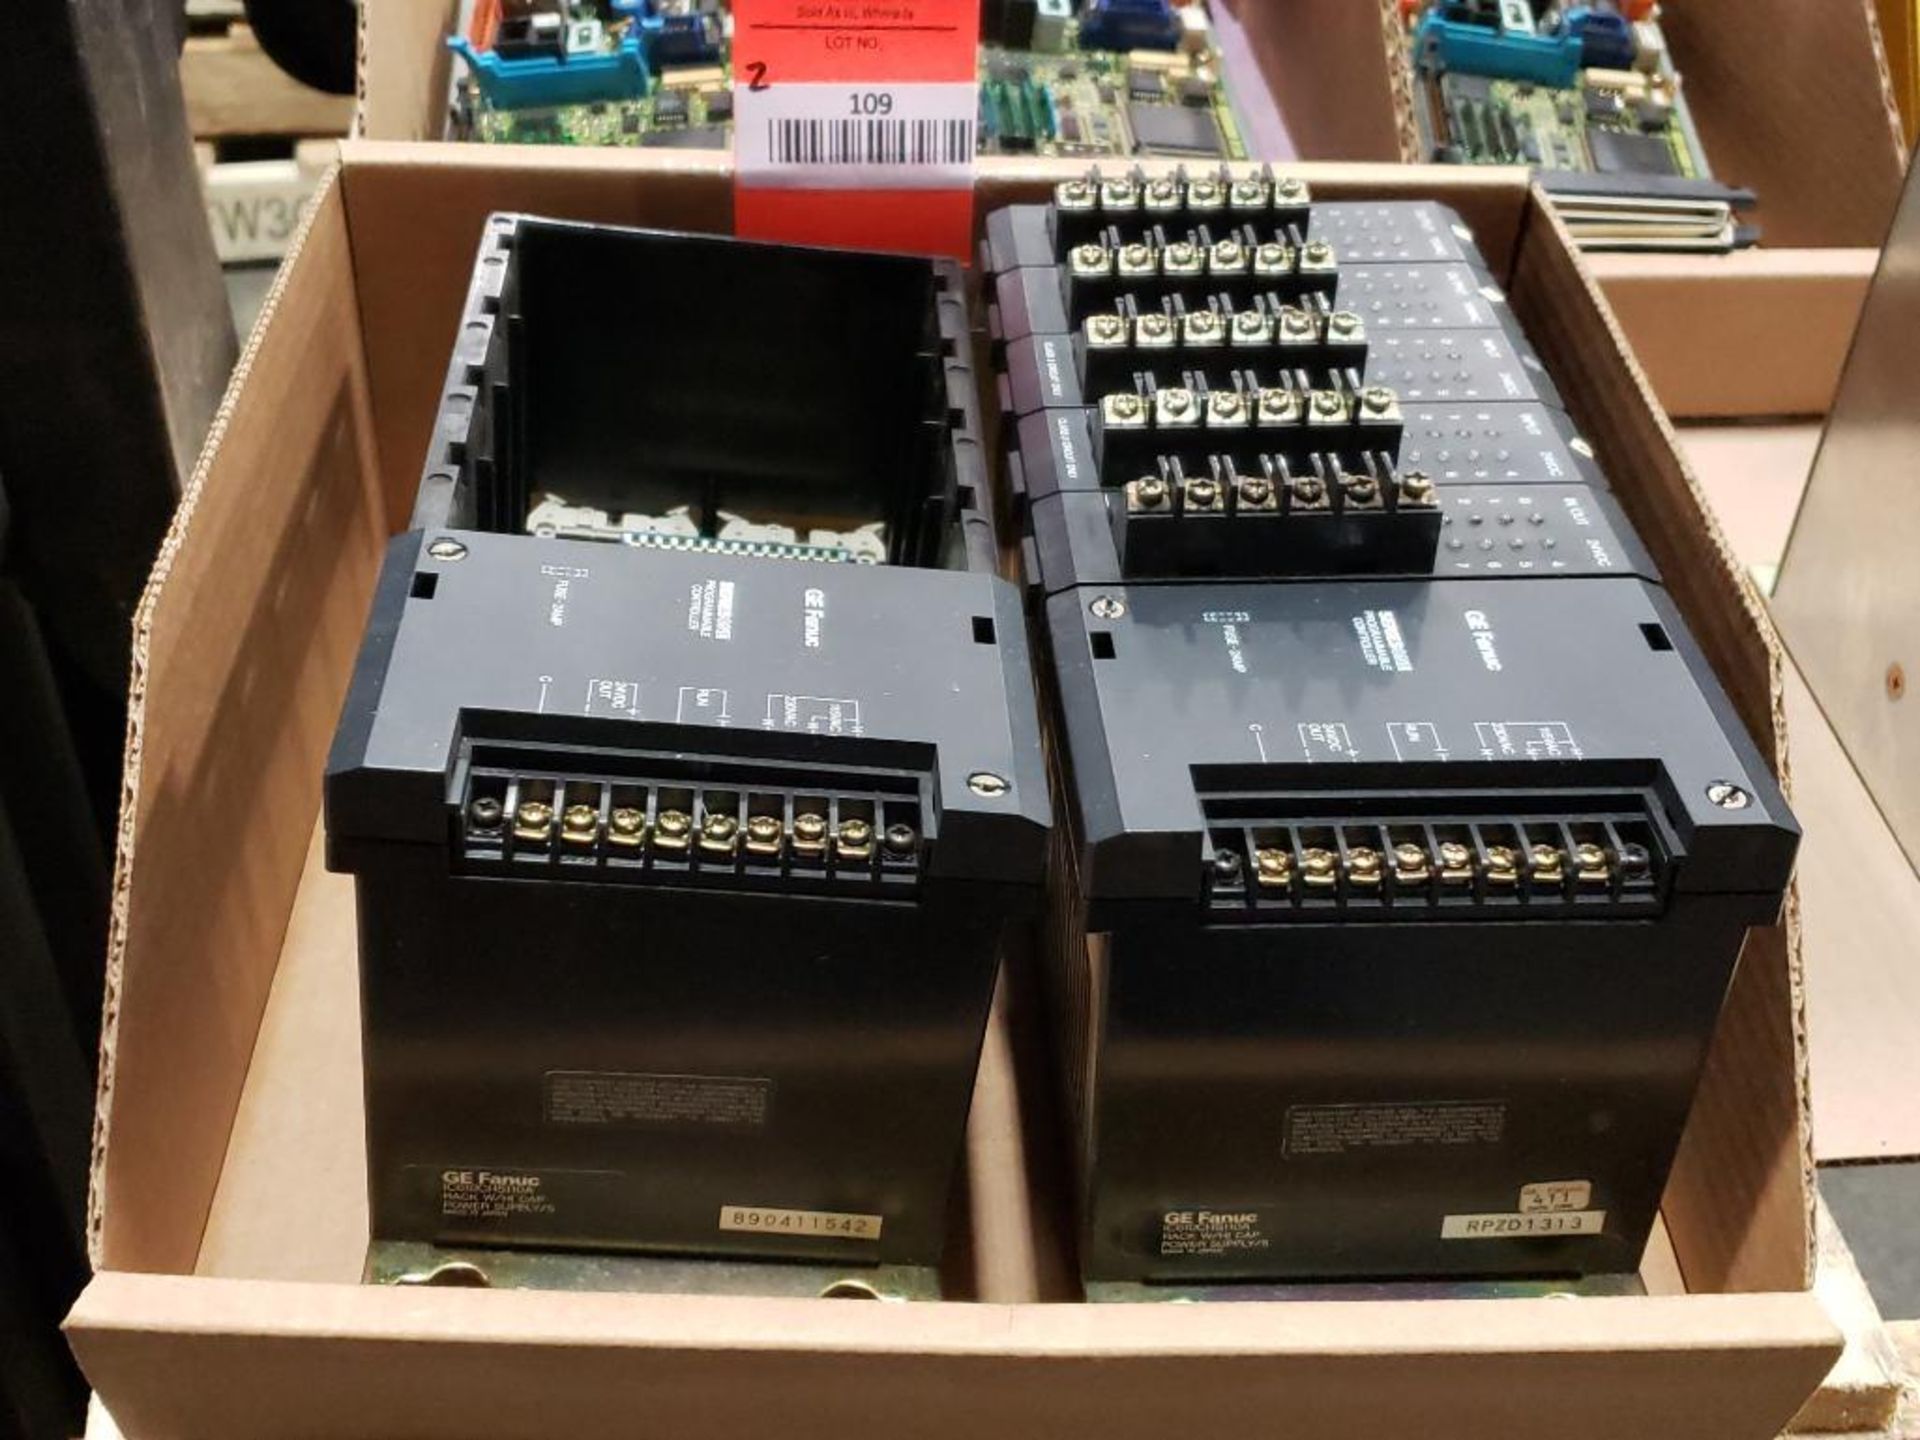 Qty 3 - GE Fanuc PLC racks with cards.